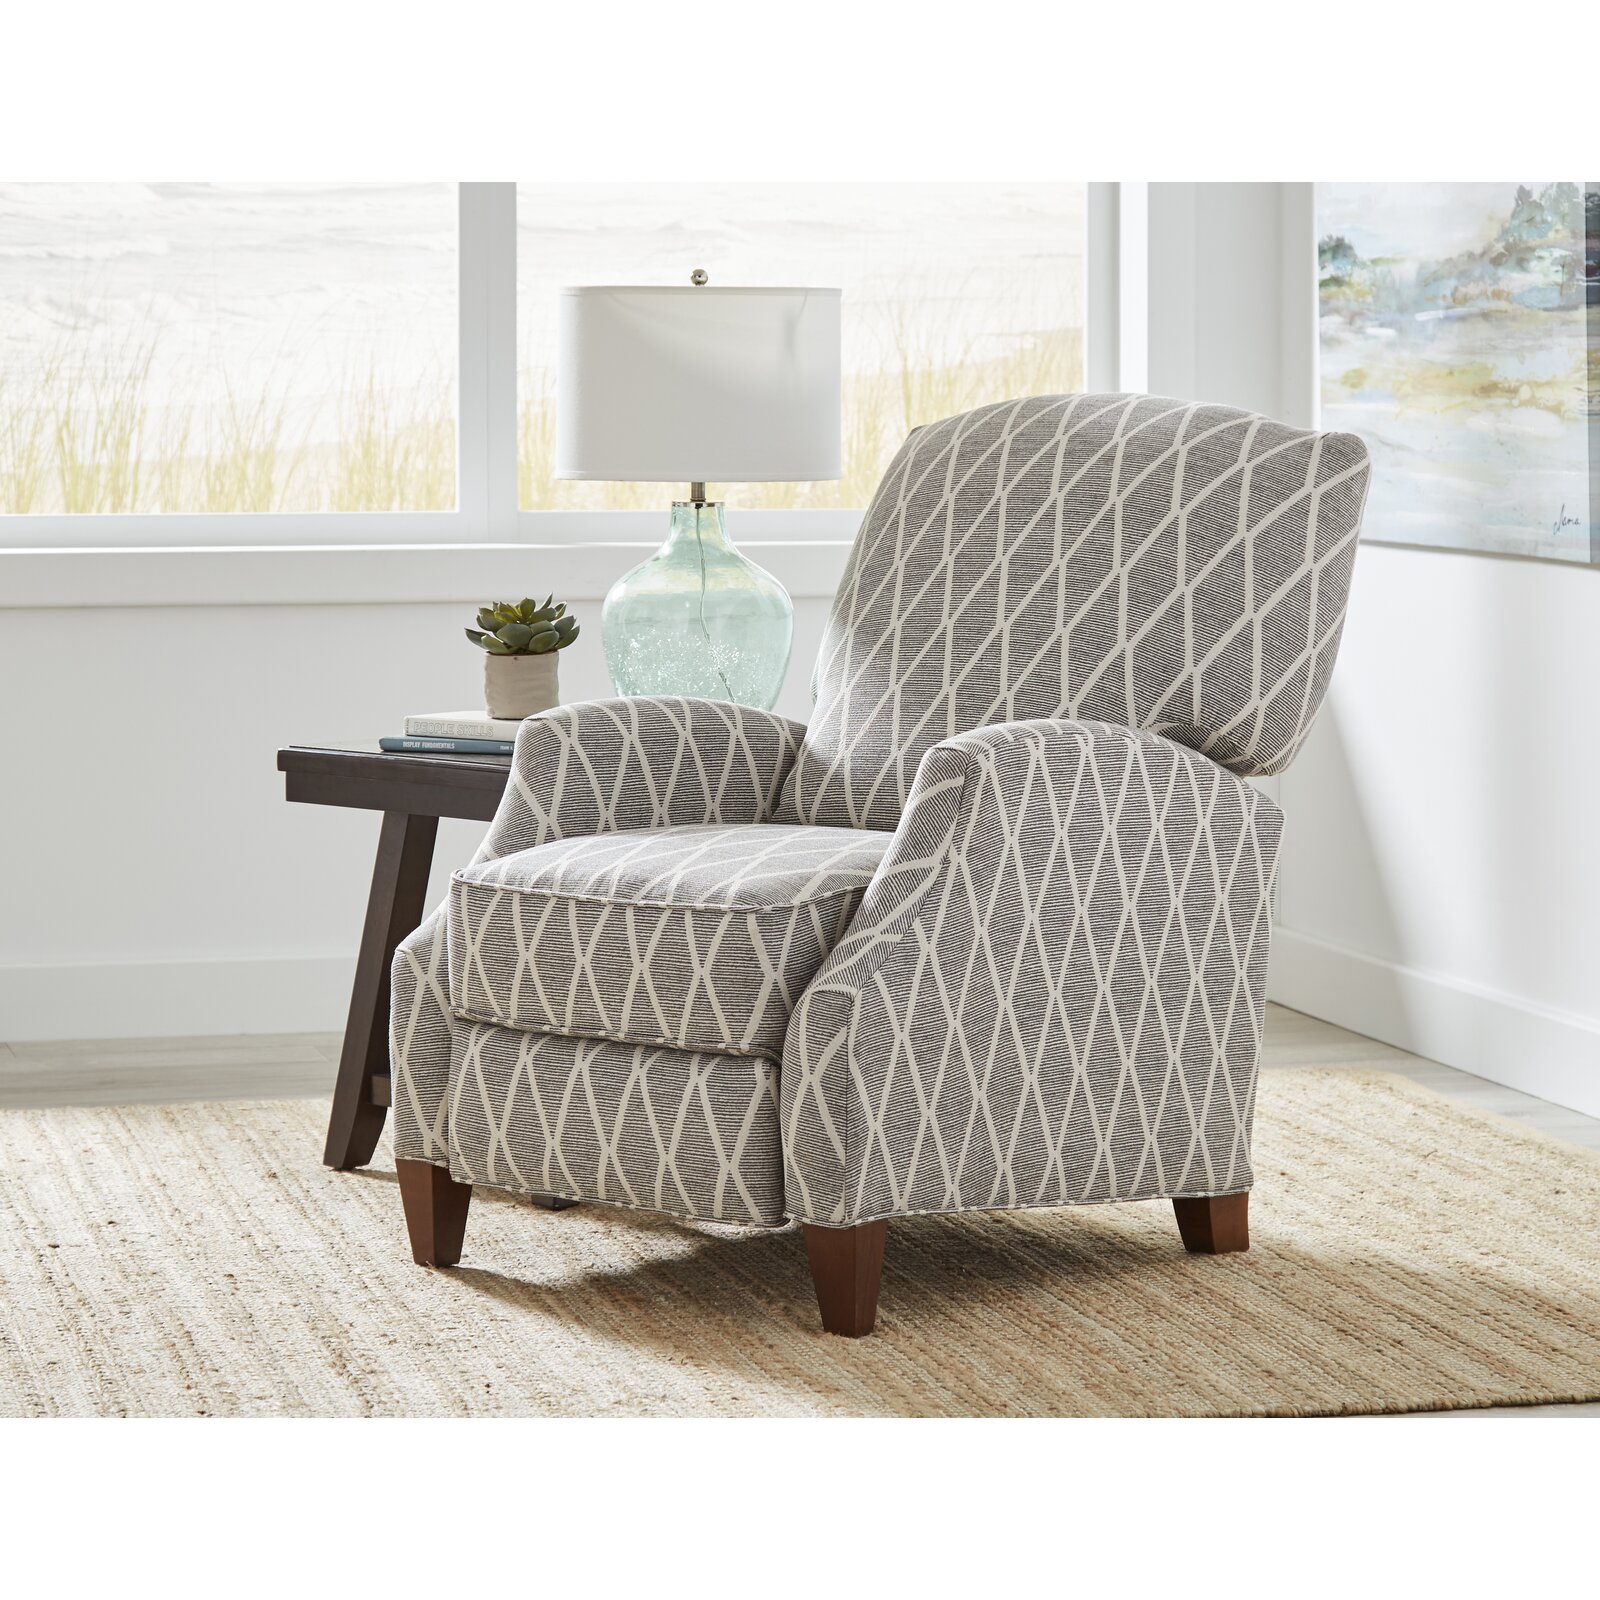 Darby Home Co Clegg Upholstered Recliner & Reviews